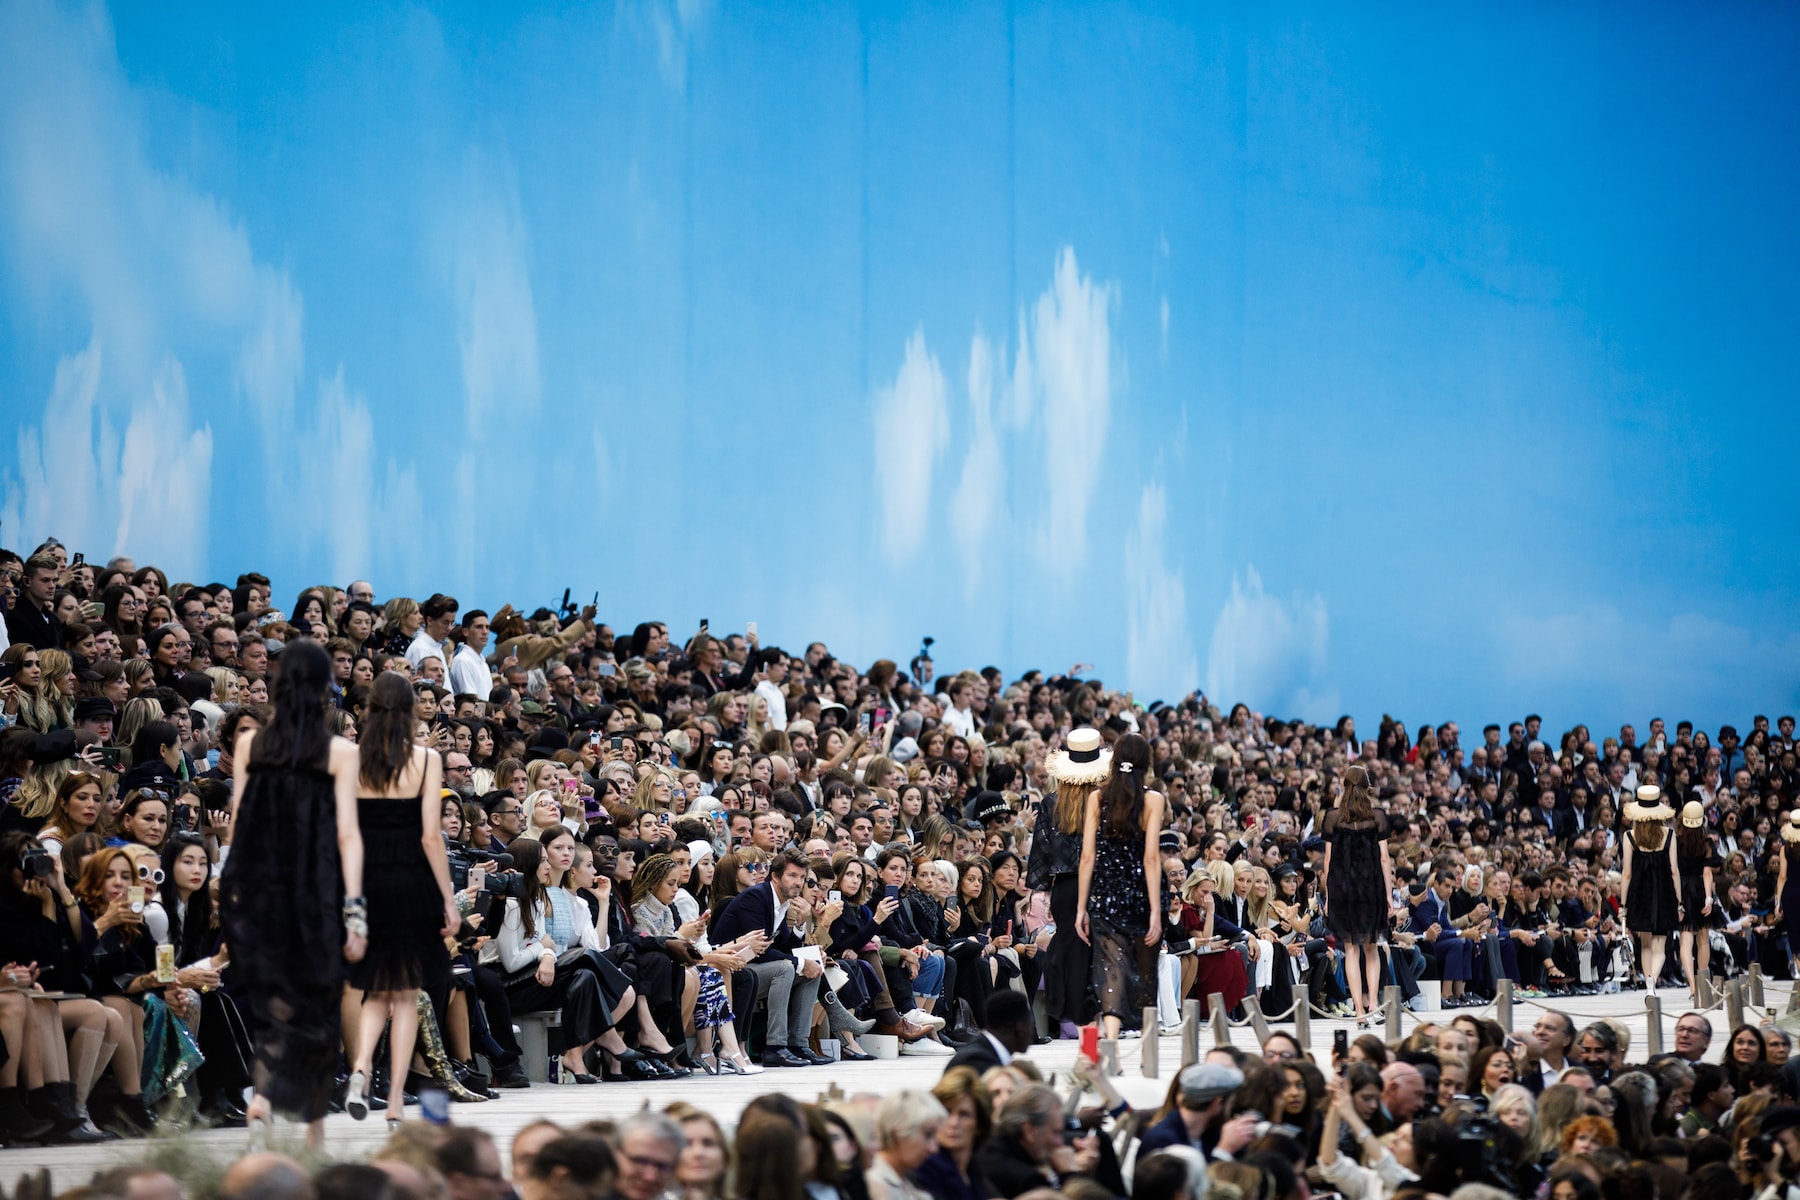 Chanel Spring Summer 2019 Paris Fashion Week Front Row Snaps Collection Karl Lagerfeld